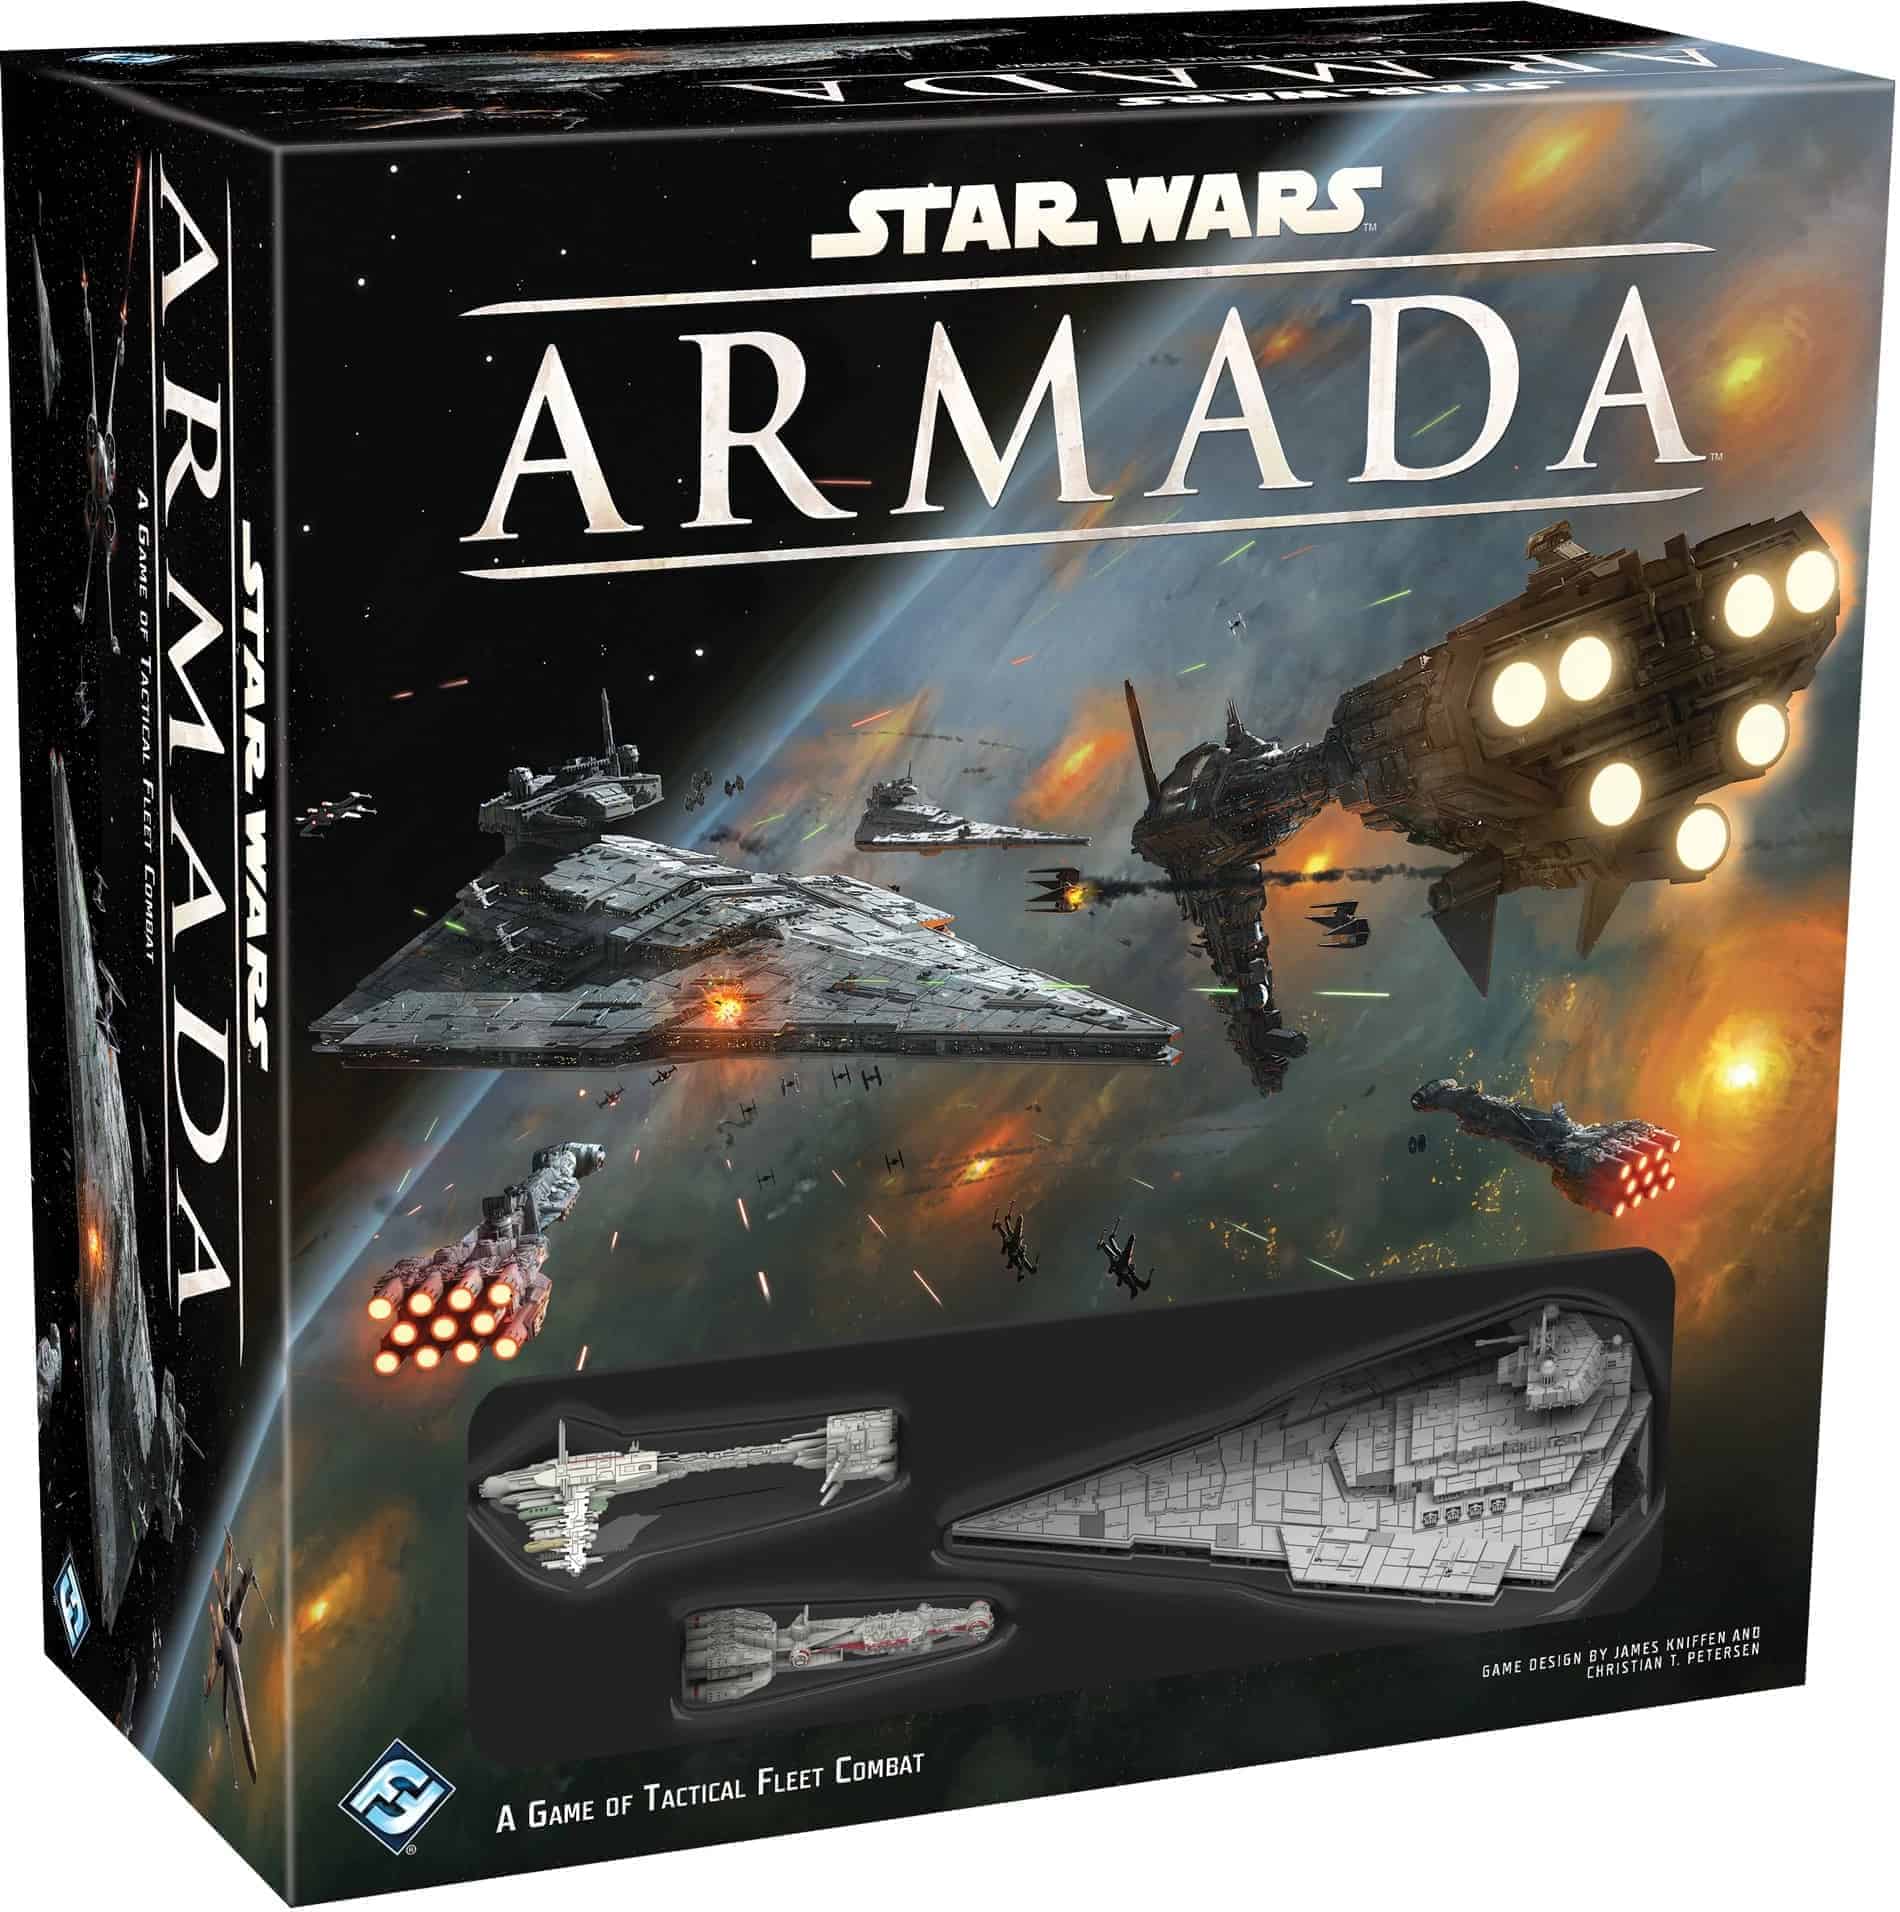 Star Wars Armada is the best Star Wars Board Game for epic scale space battles